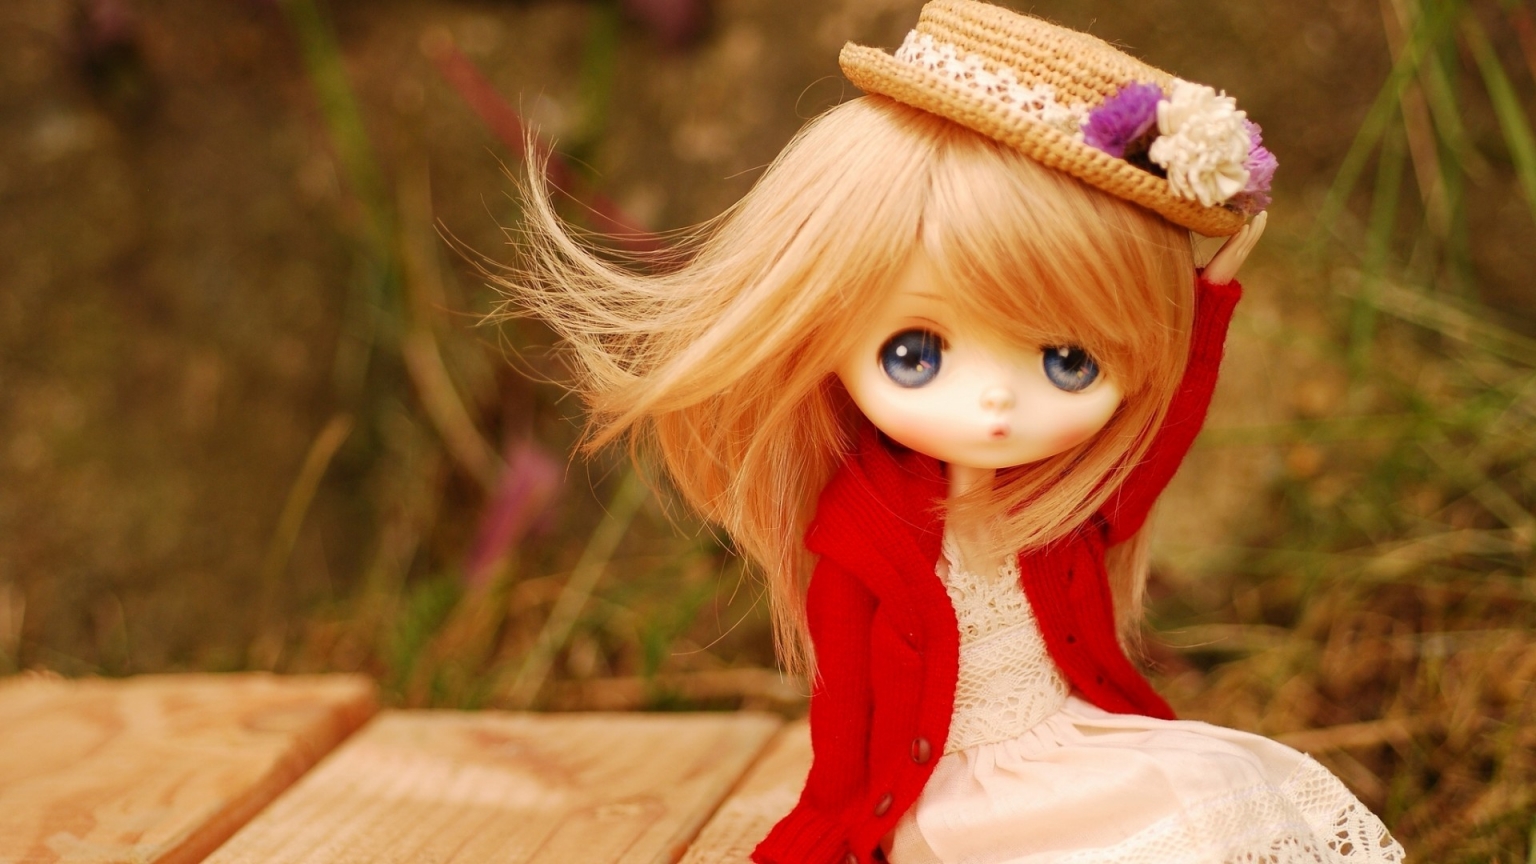 Cute Little Doll for 1536 x 864 HDTV resolution